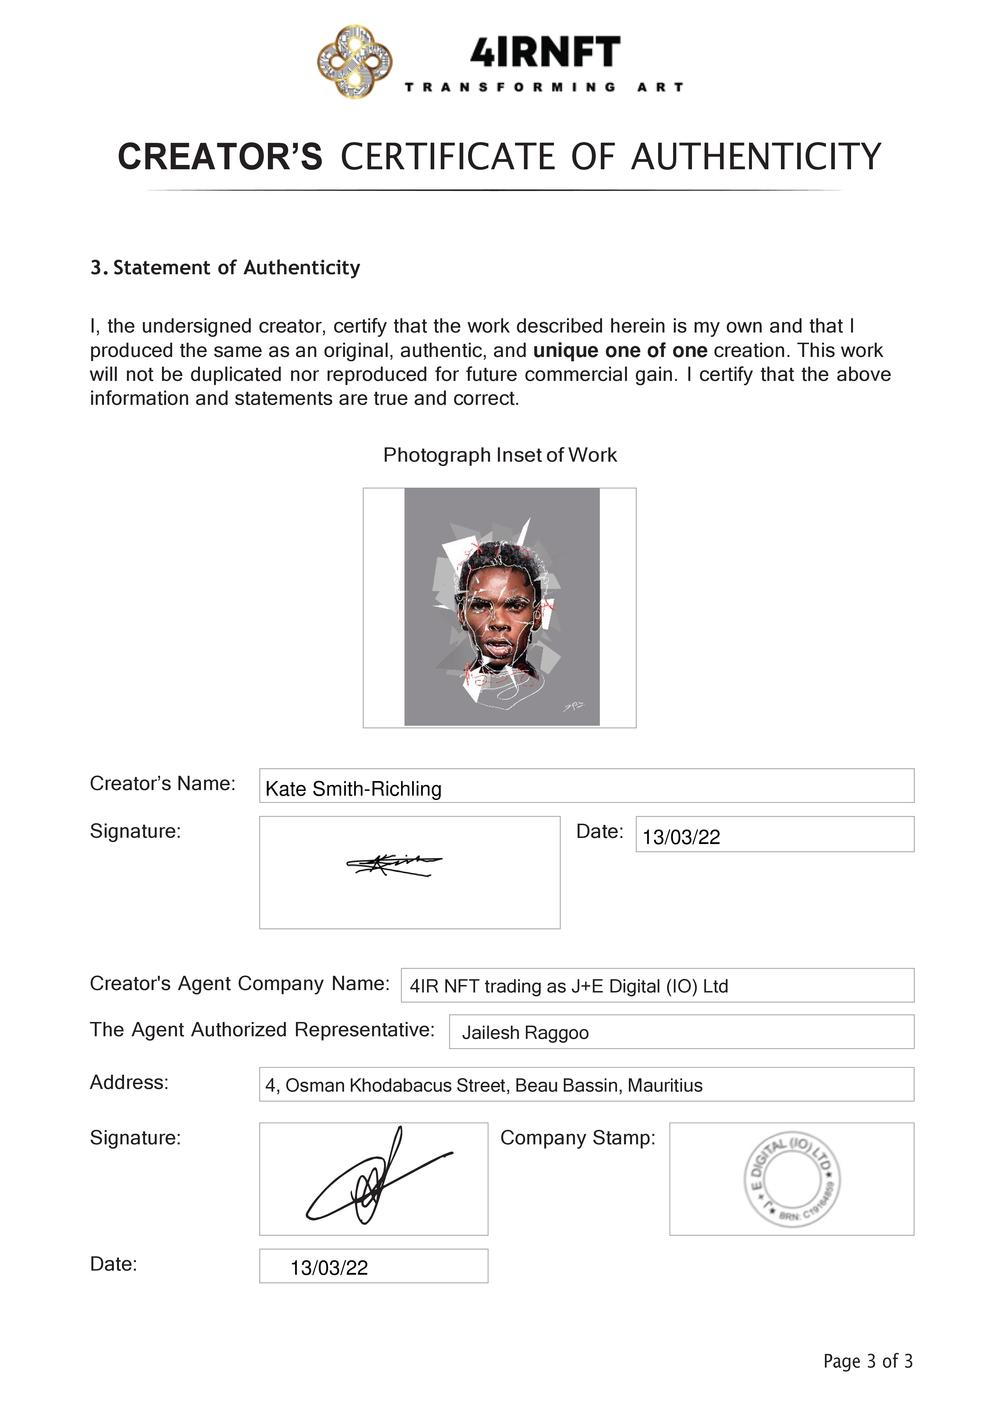 Certificate of Authenticity and Consignment - A Fragmented Man